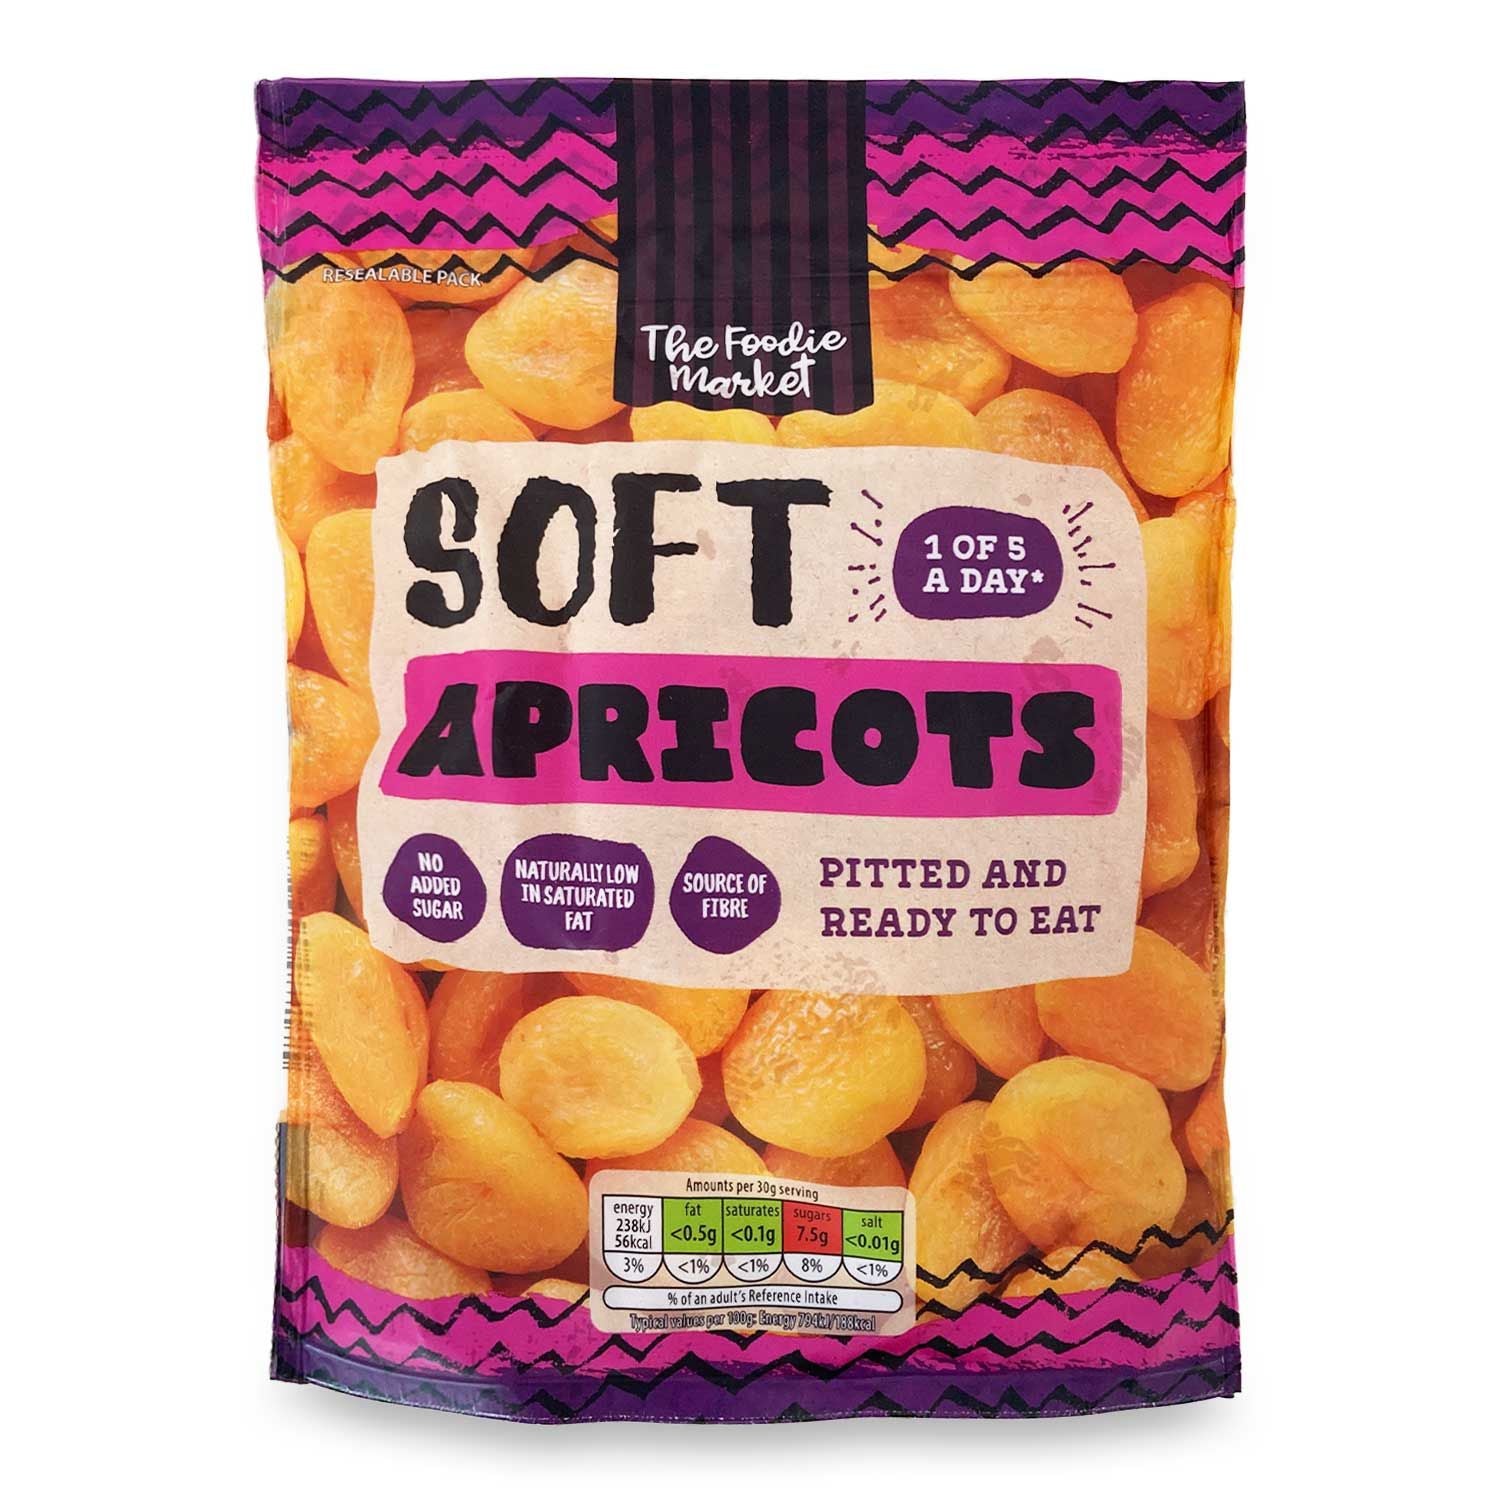 The Foodie Market Soft Apricots 200g